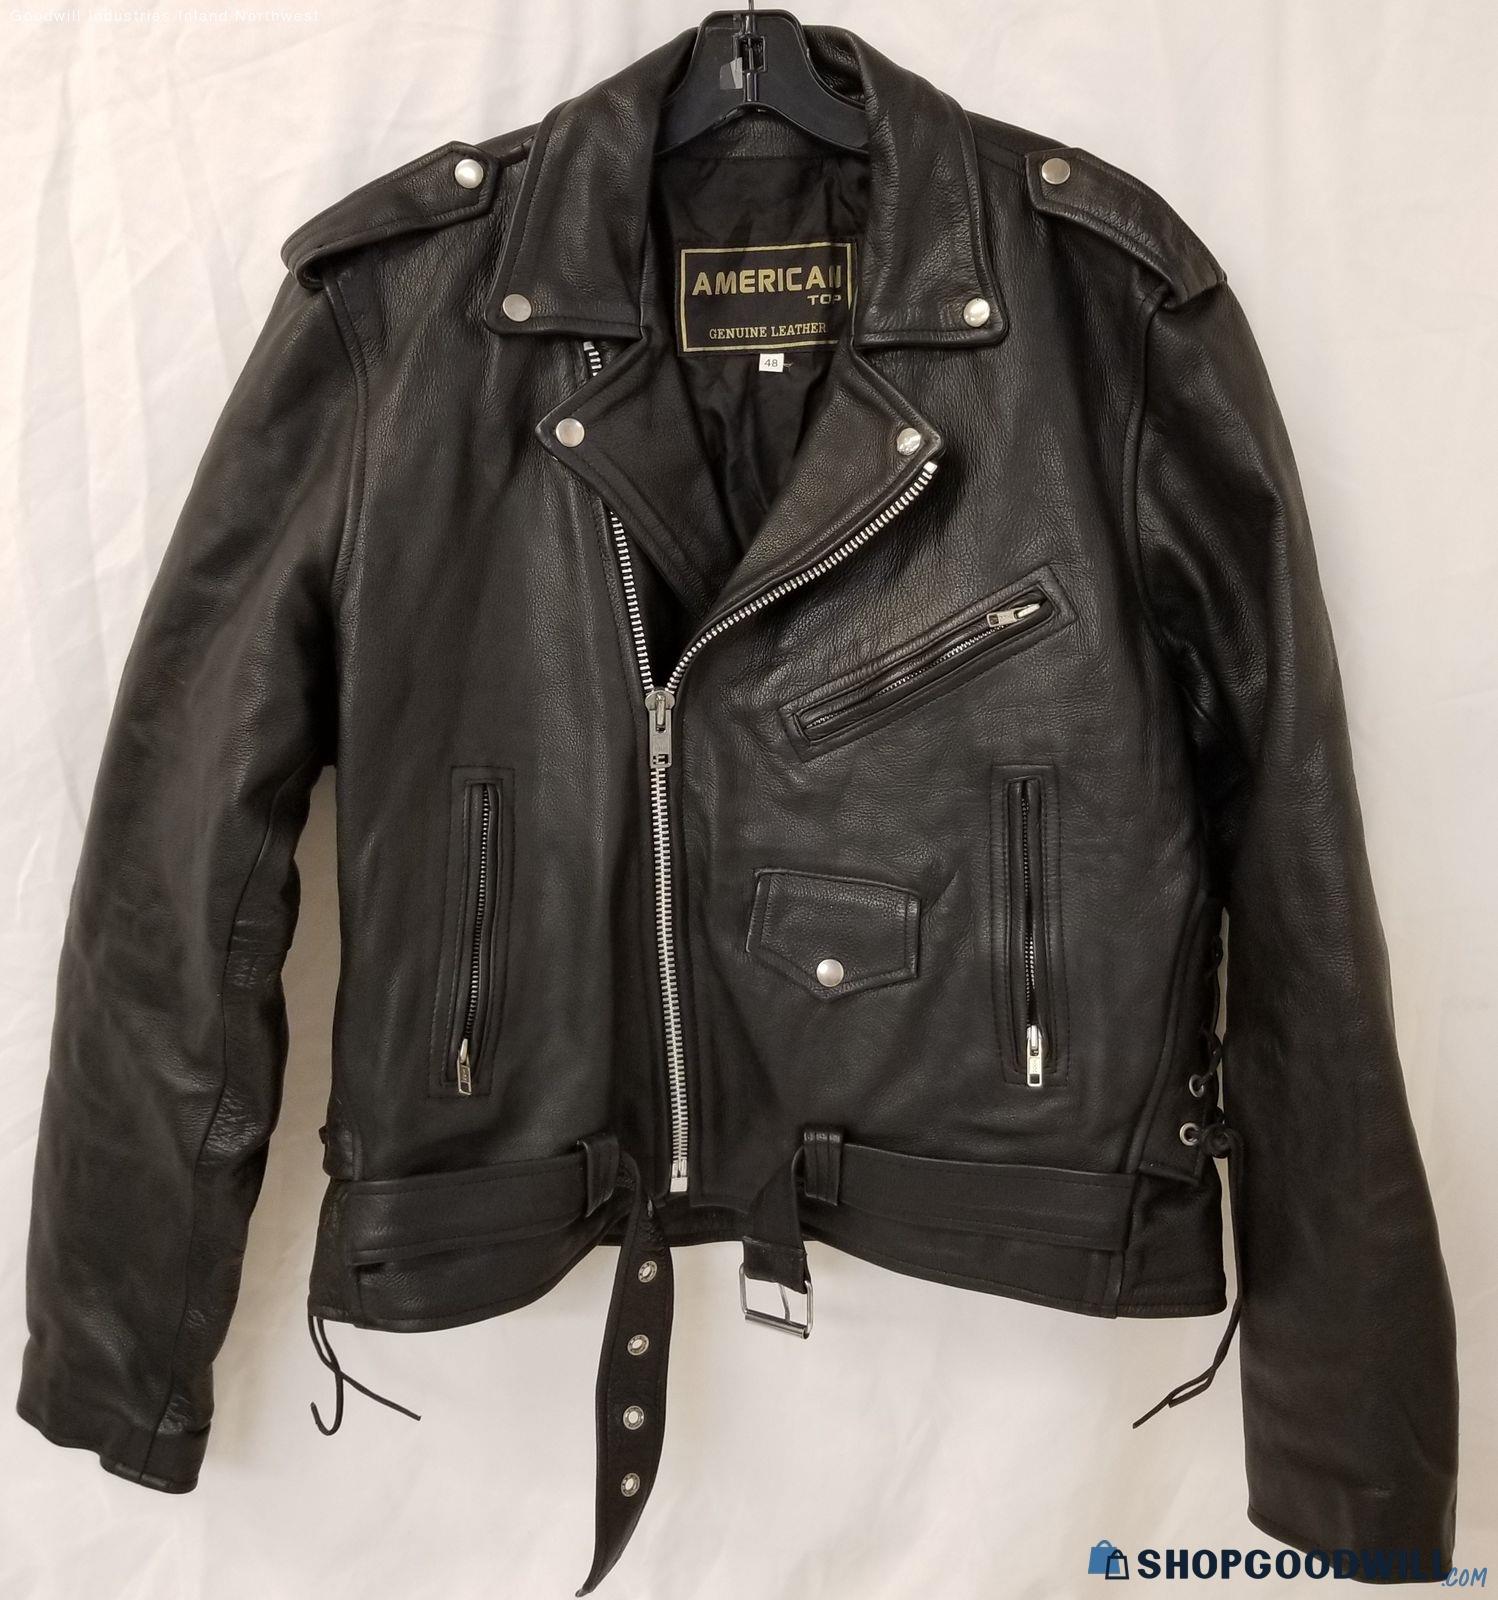 Men's American Top Black Leather Jacket Size 48 - shopgoodwill.com